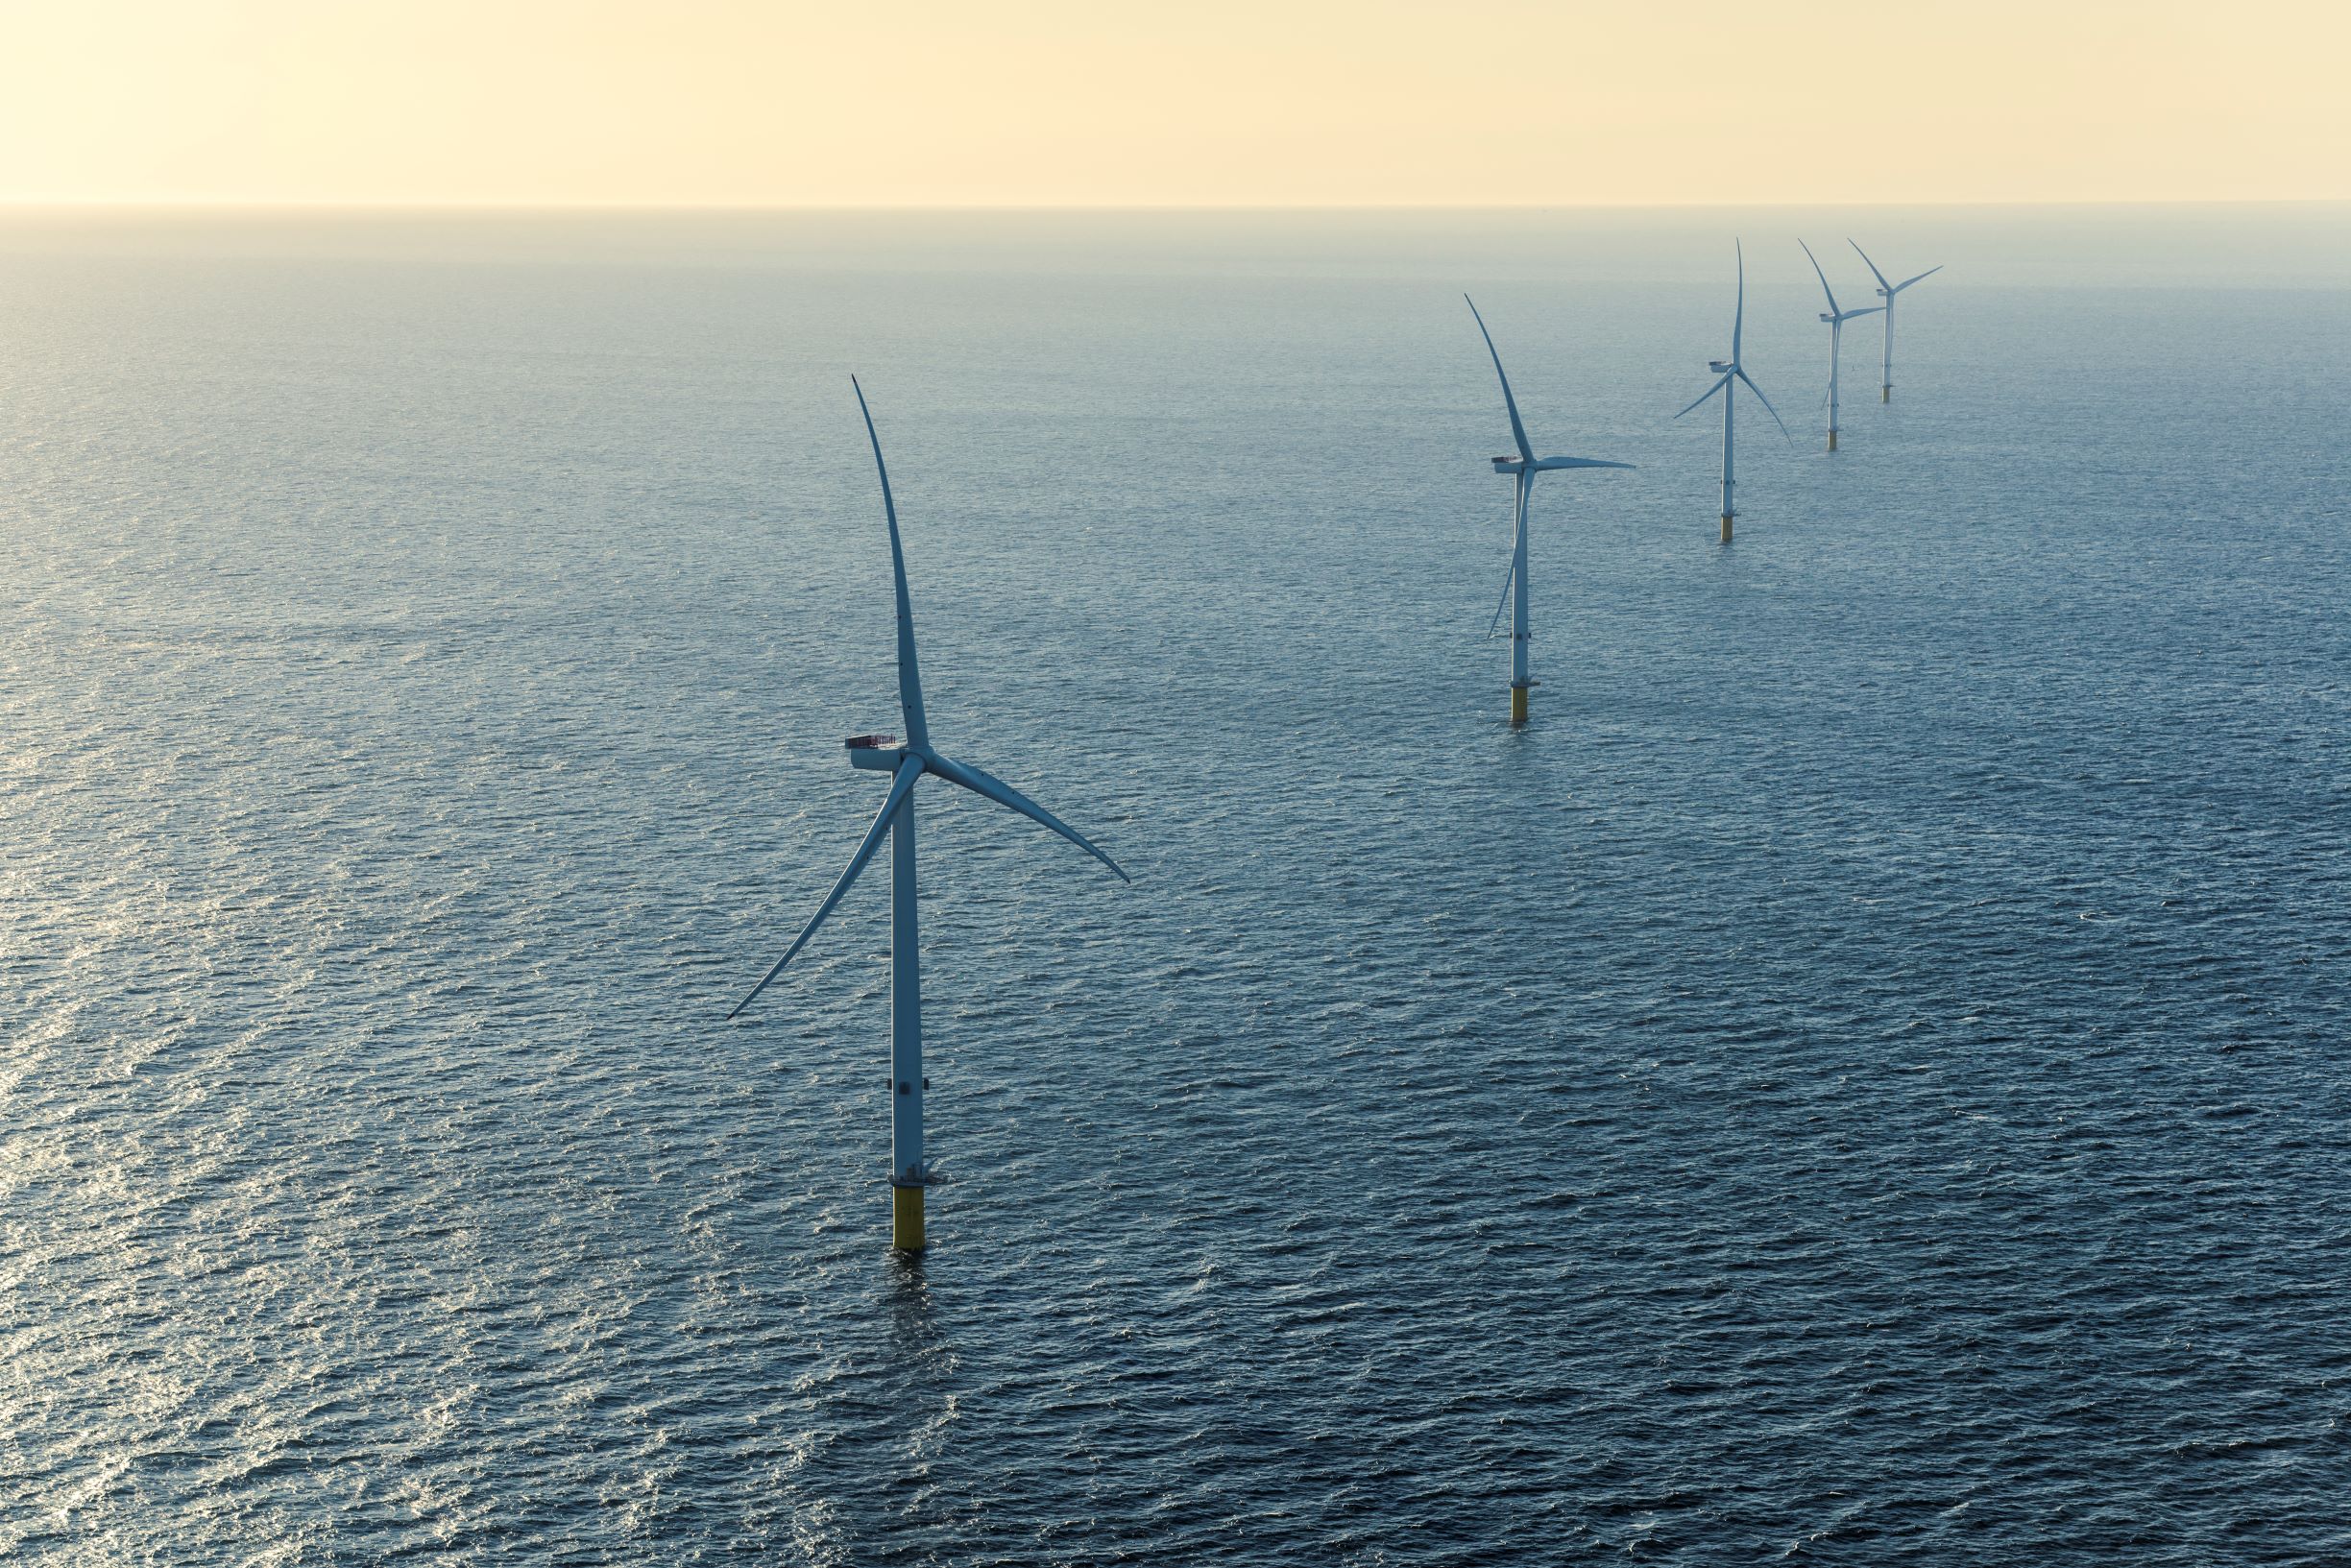 MHI-Vestas-Turbines-for-700MW-Japanese-Offshore-Wind-Project